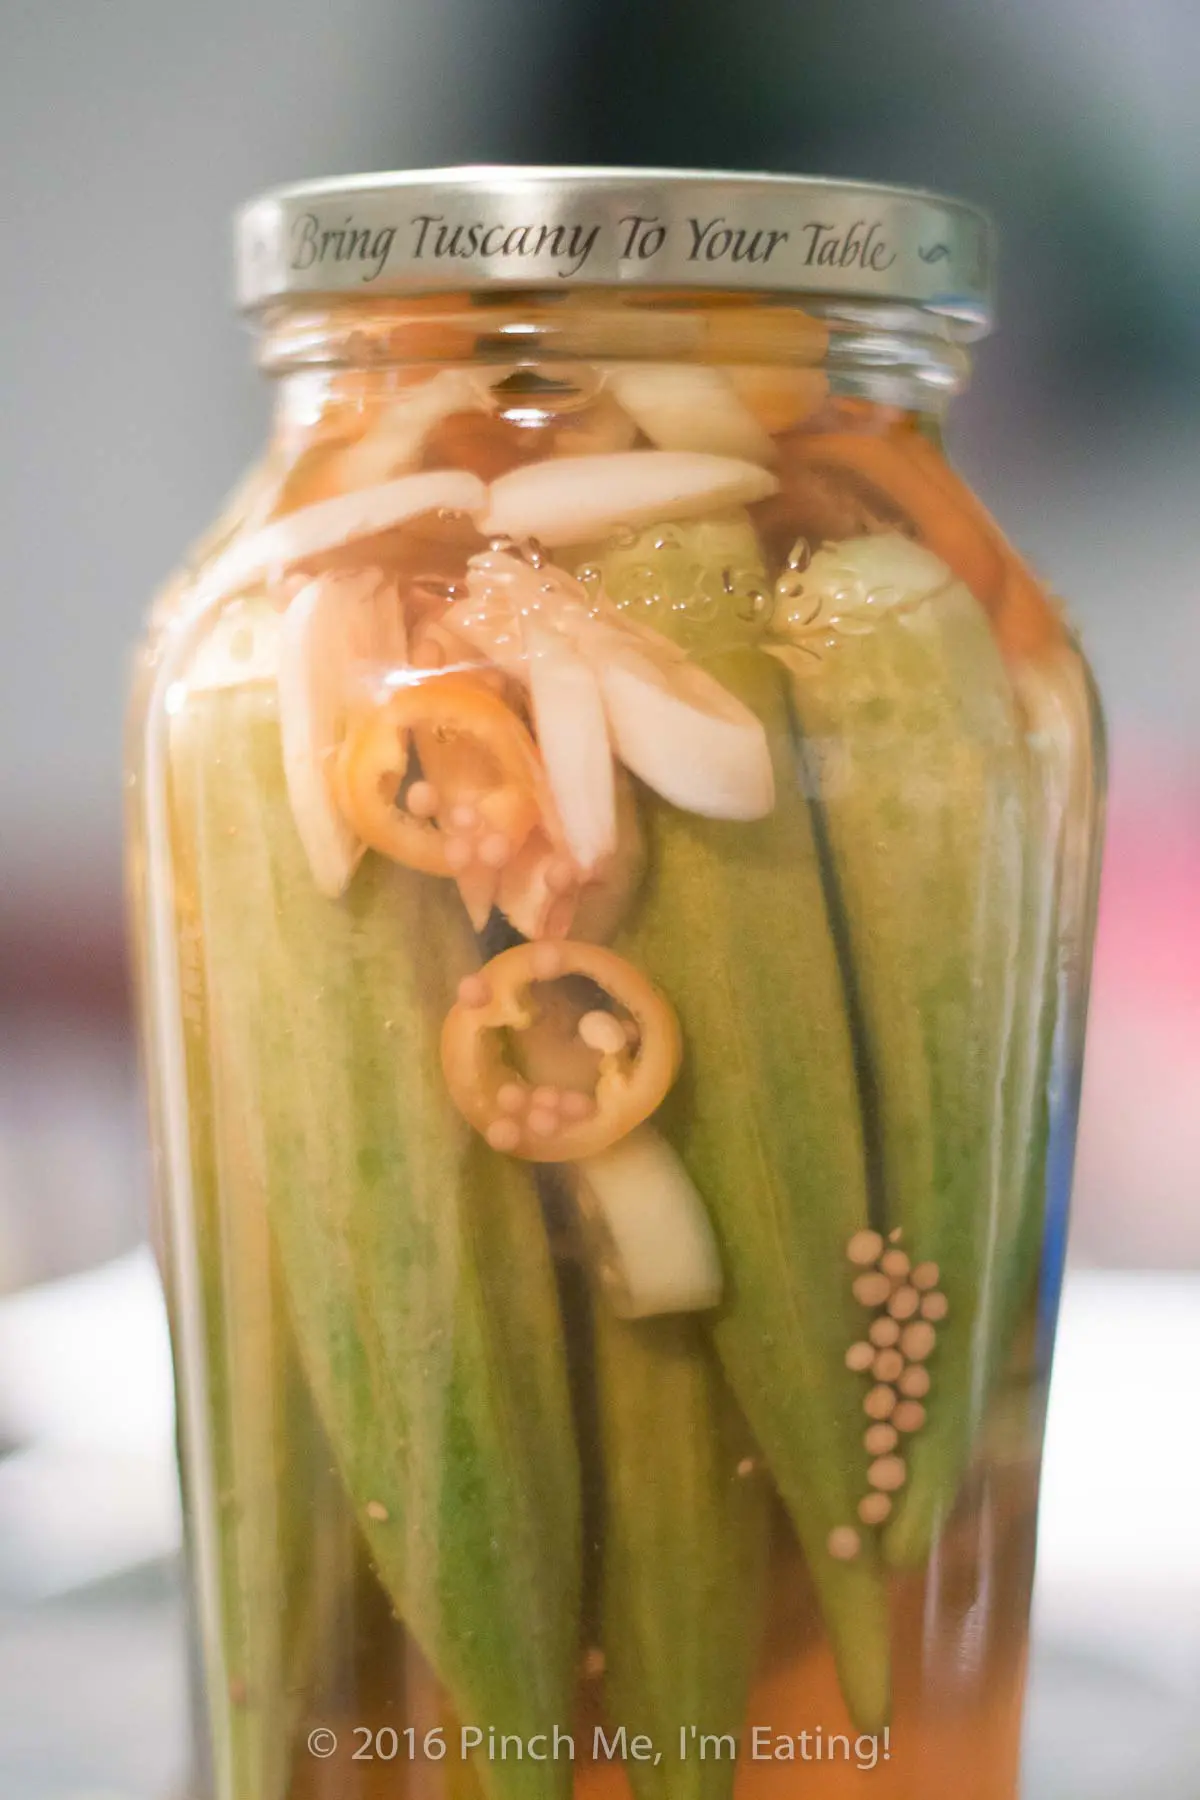 Easy refrigerator pickled okra is perfect for small batches! No canning experience necessary. Make these okra pickles two ways — sweet and tangy or hot and smoky! | www.pinchmeimeating.com